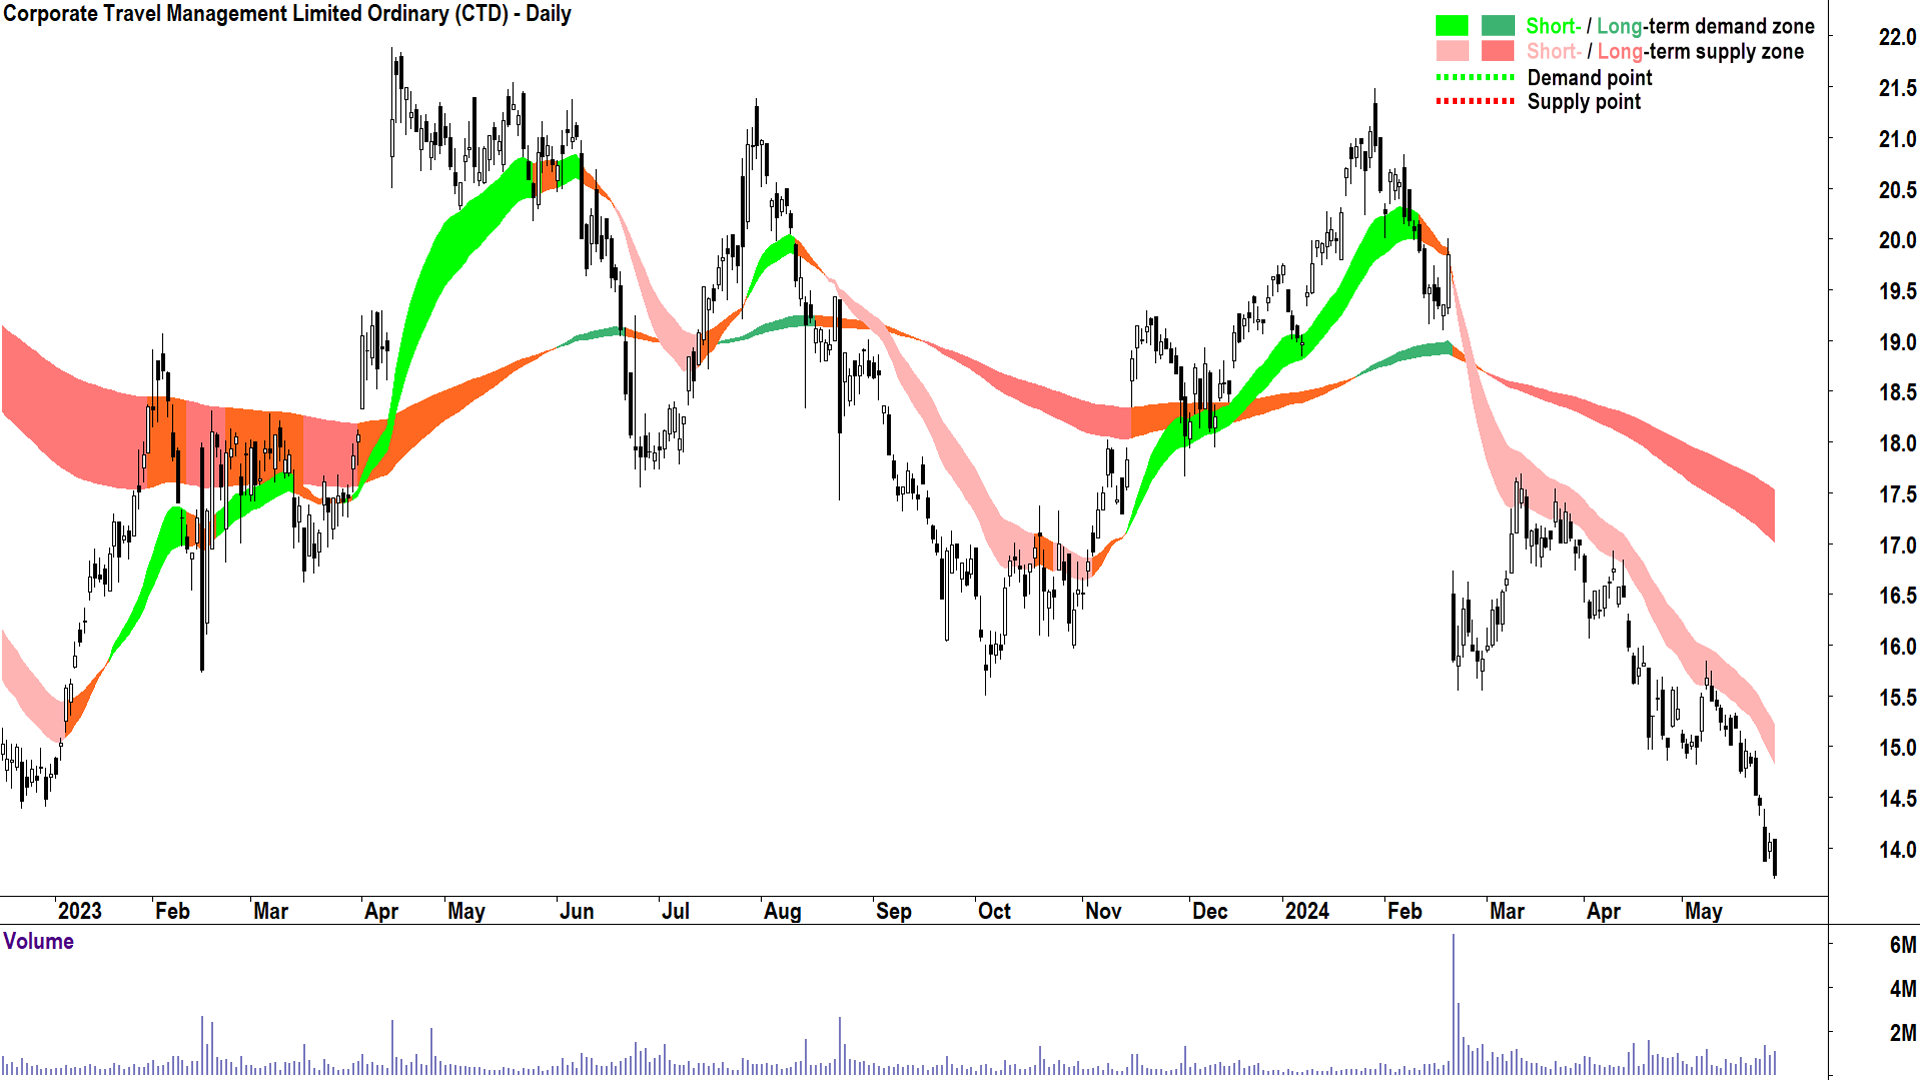 Corporate Travel Management (ASX-CTD) chart 28 May 2024